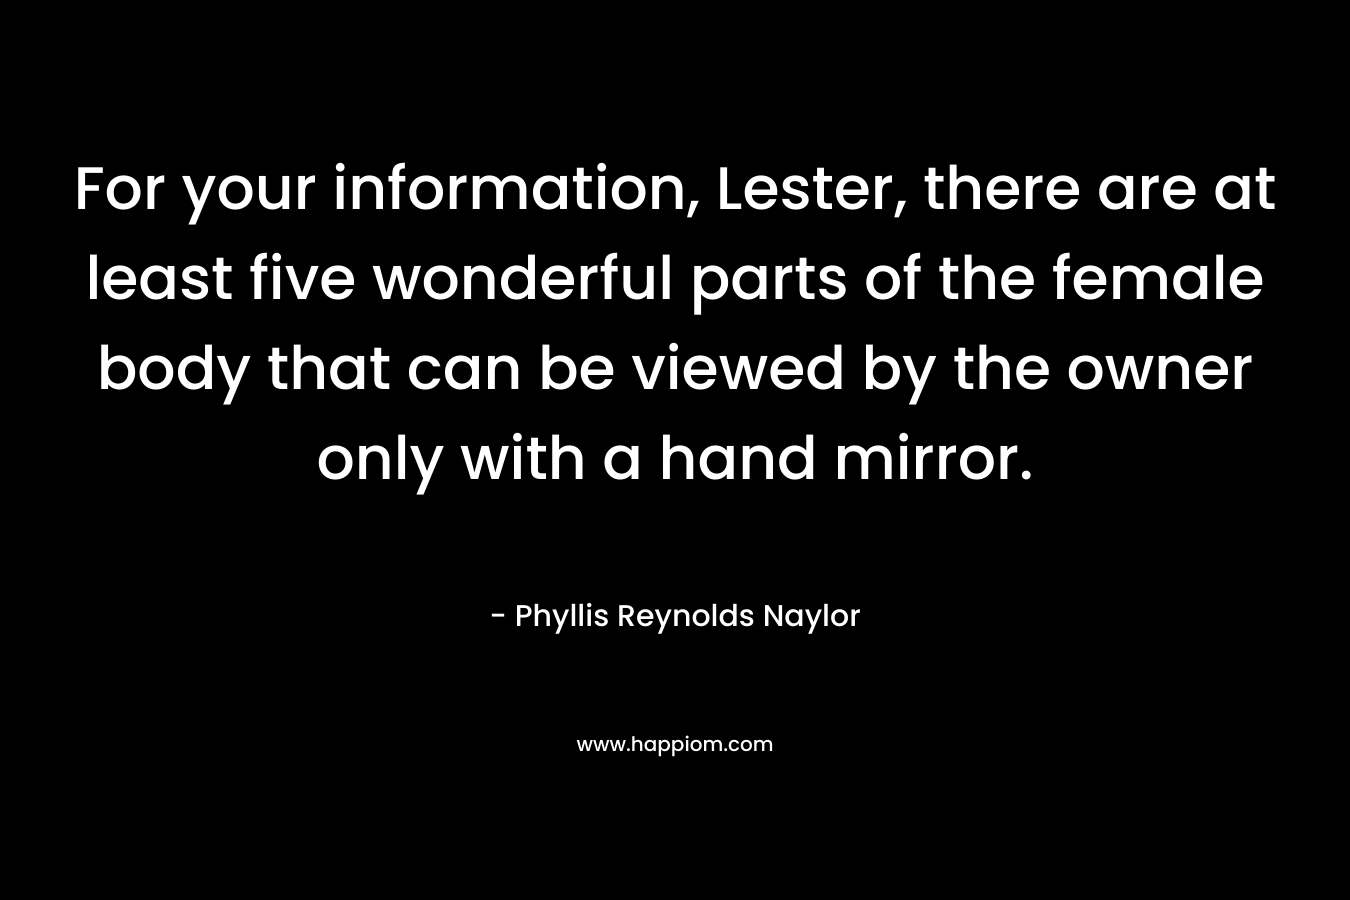 For your information, Lester, there are at least five wonderful parts of the female body that can be viewed by the owner only with a hand mirror. – Phyllis Reynolds Naylor